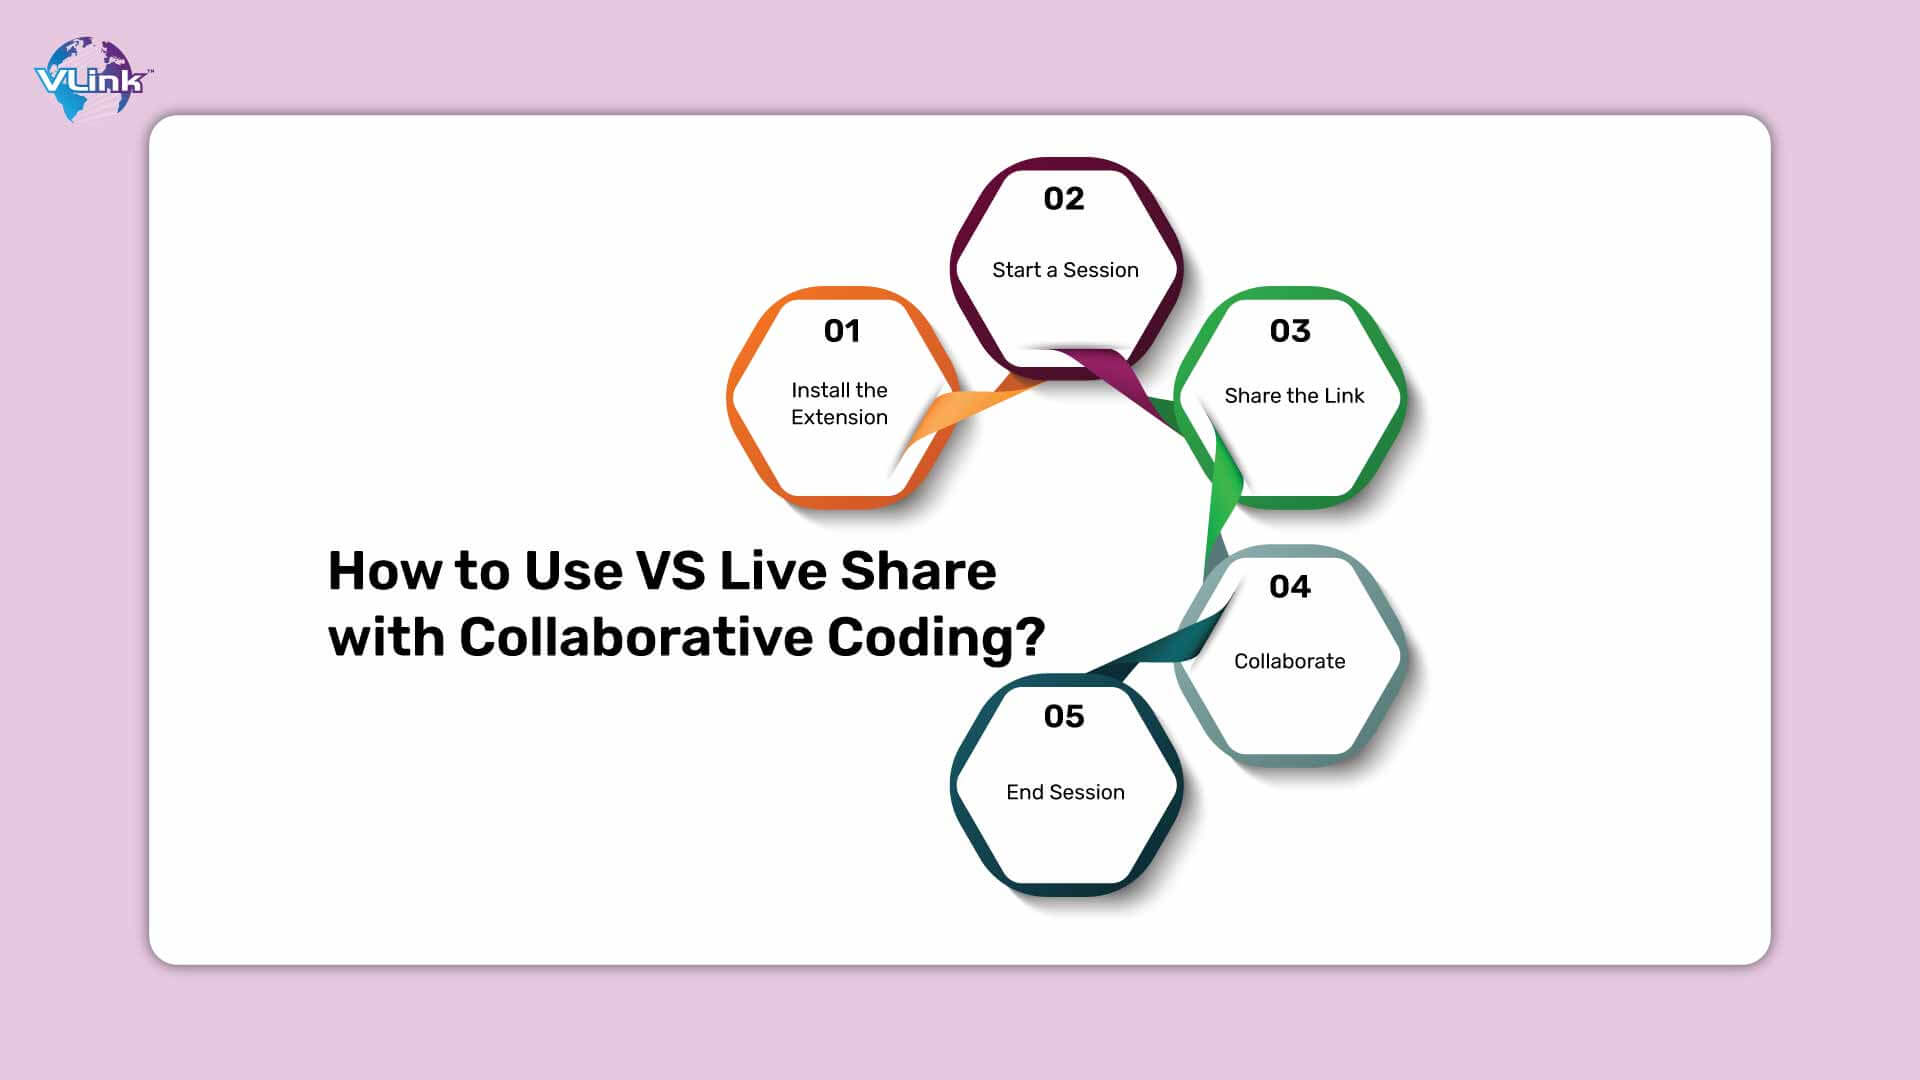 How to Use VS Live Share with Collaborative Coding